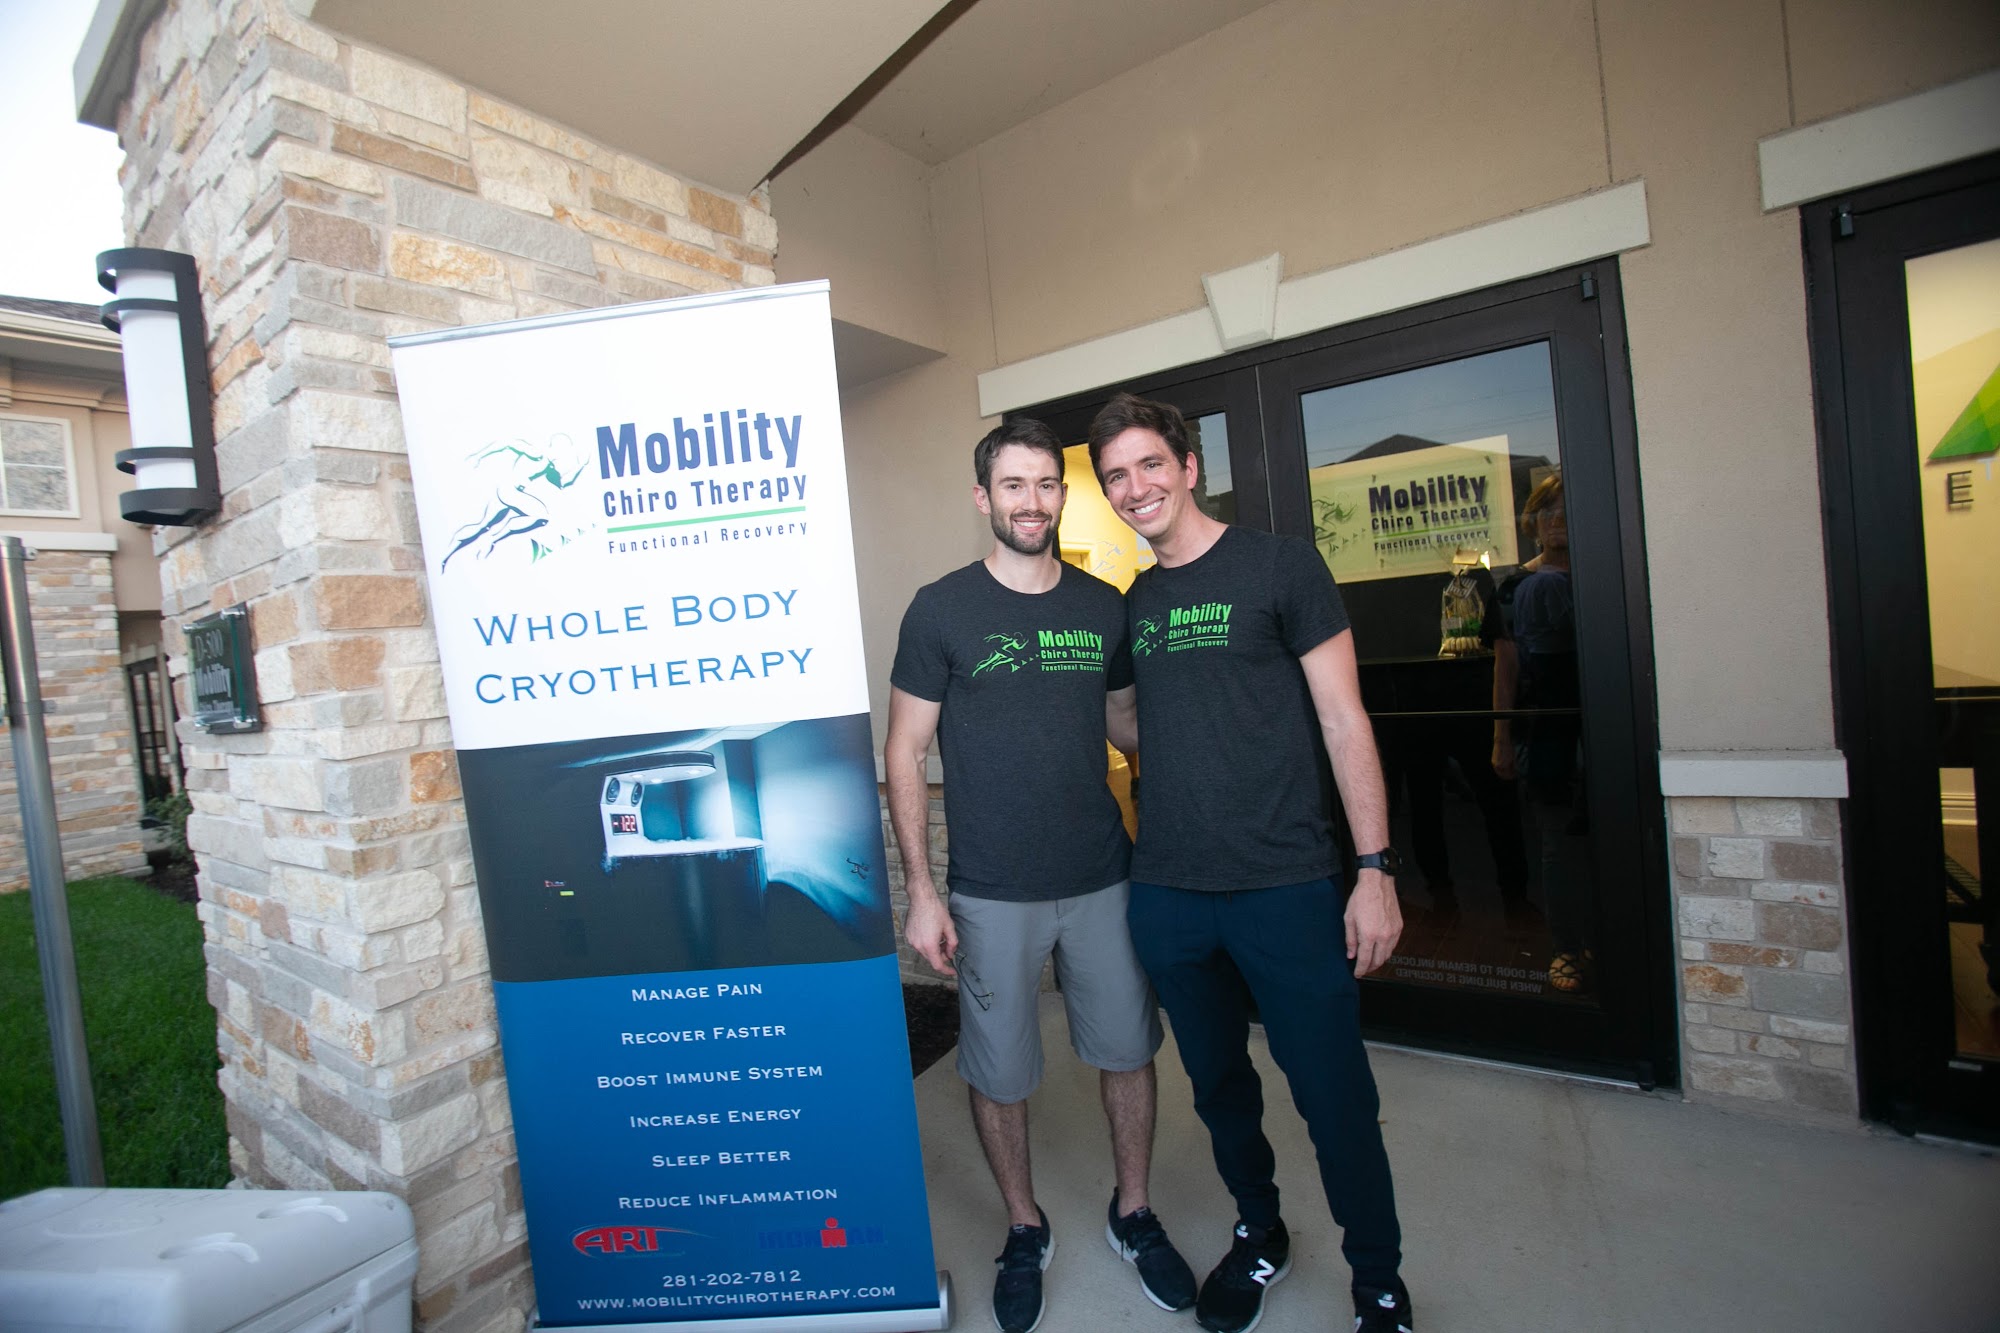 Mobility Chiro Therapy